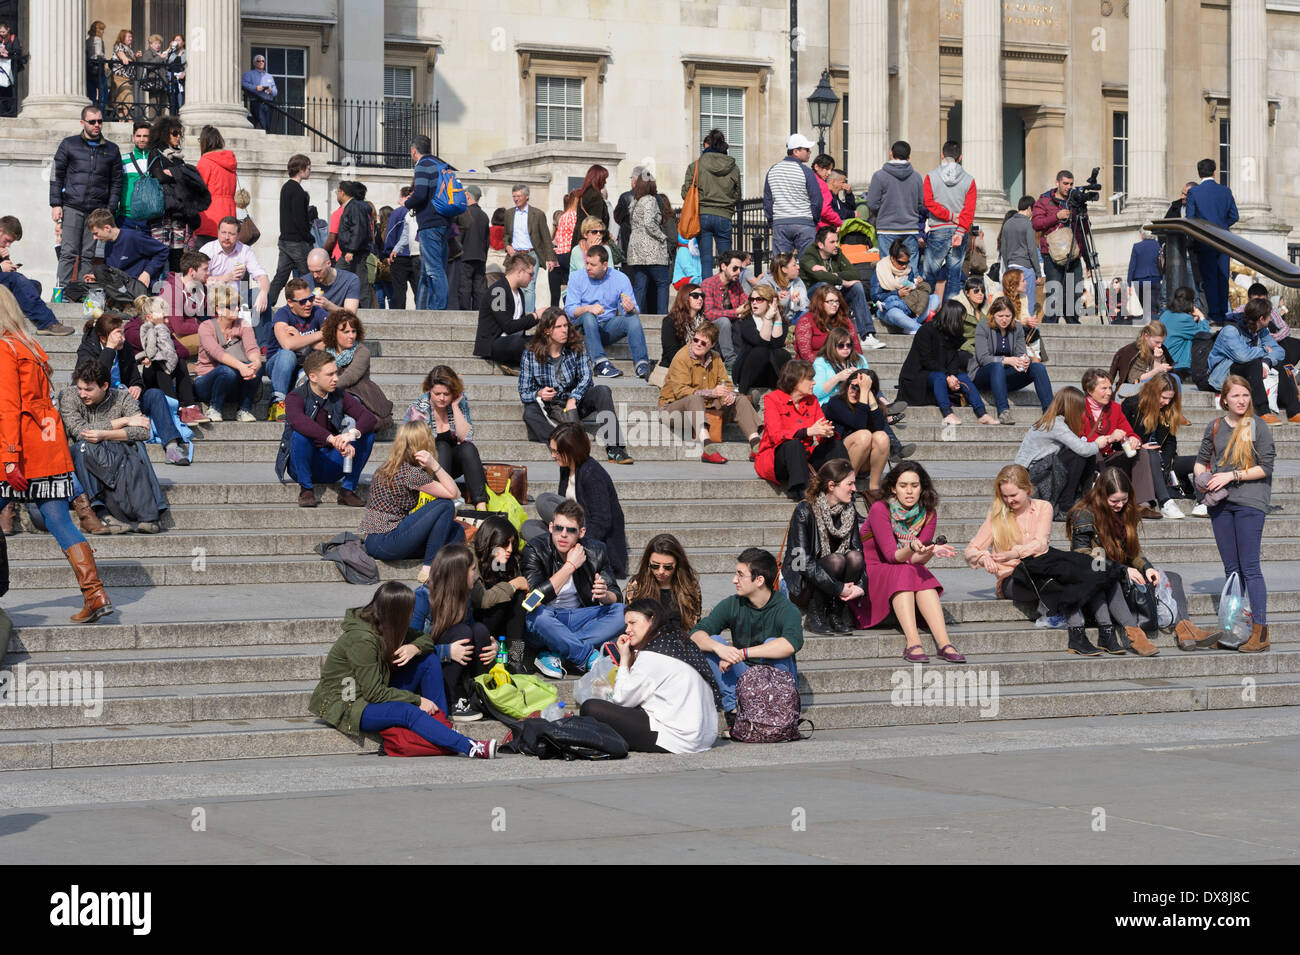 Tourists sitting on the steps in Trafalgar Square near the National Gallery, London, England, United Kingdom. Stock Photo